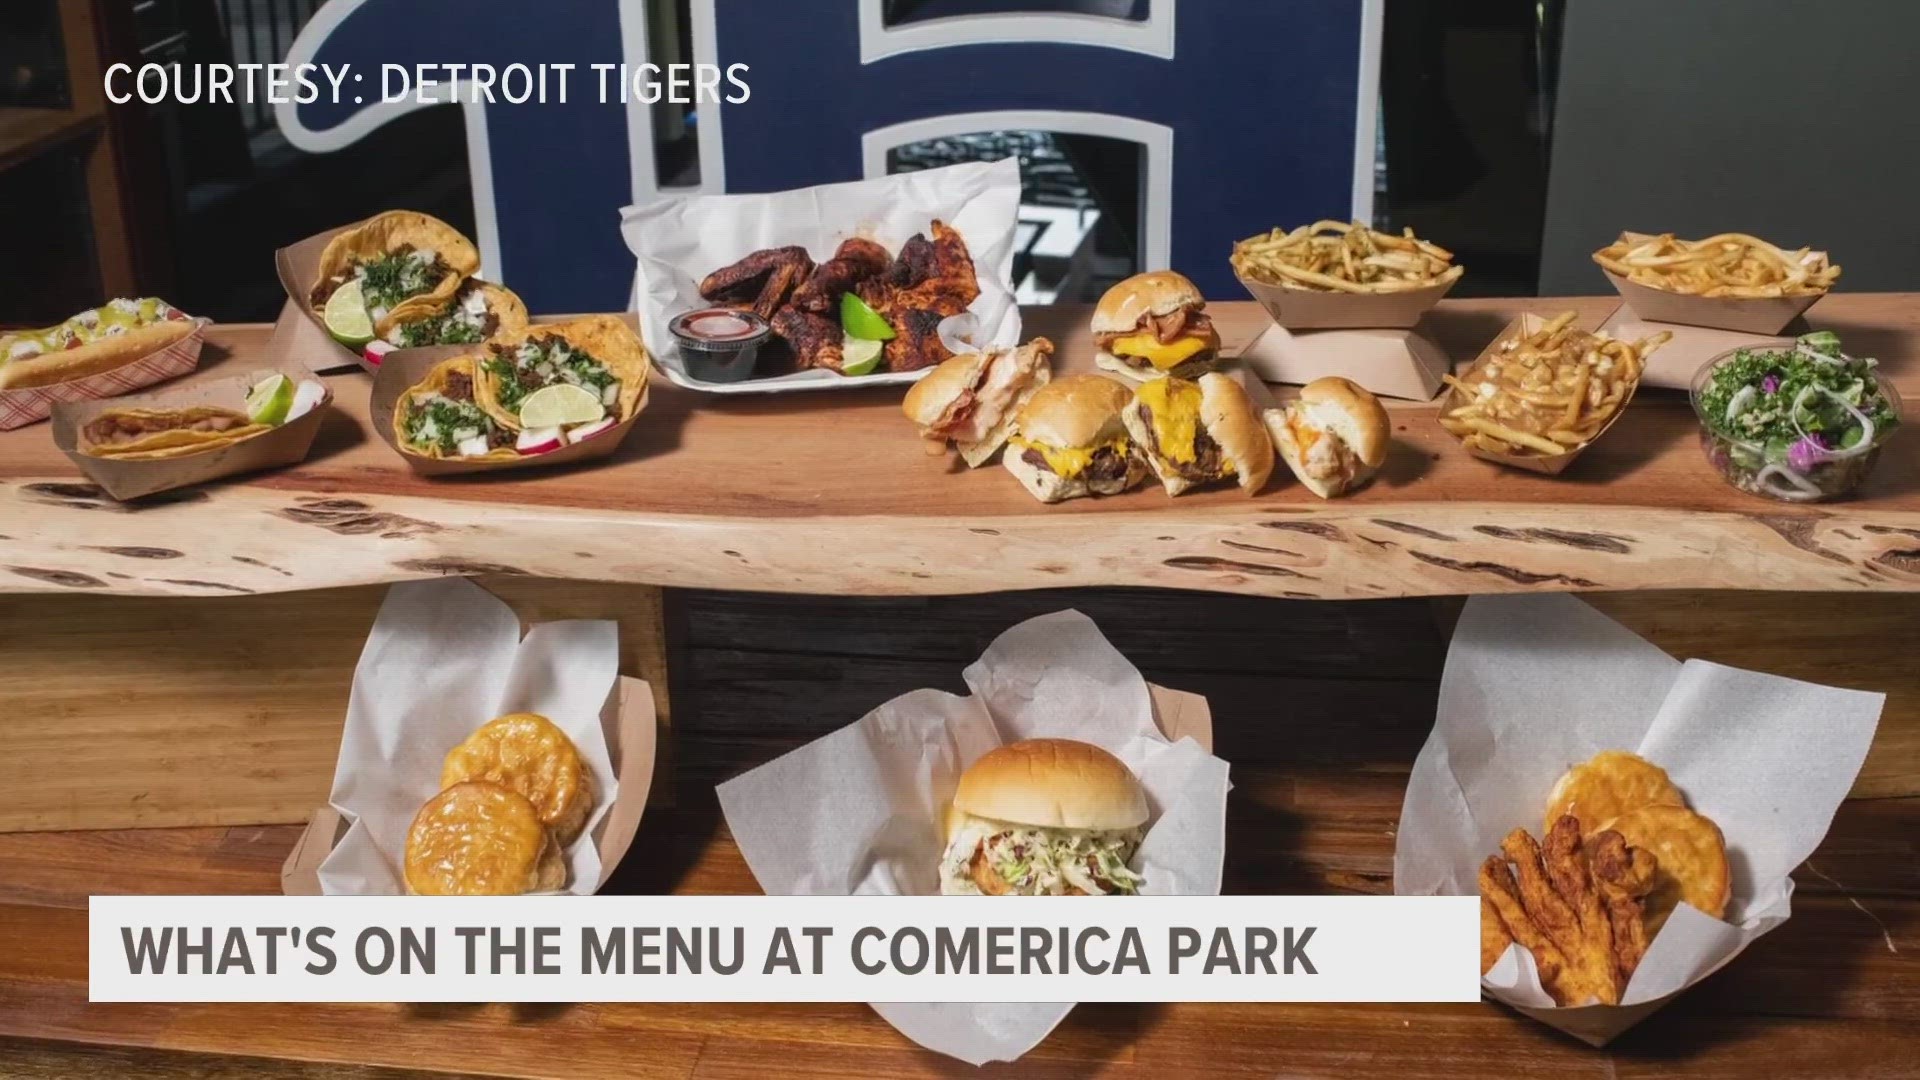 What's on the menu at Comerica Park?